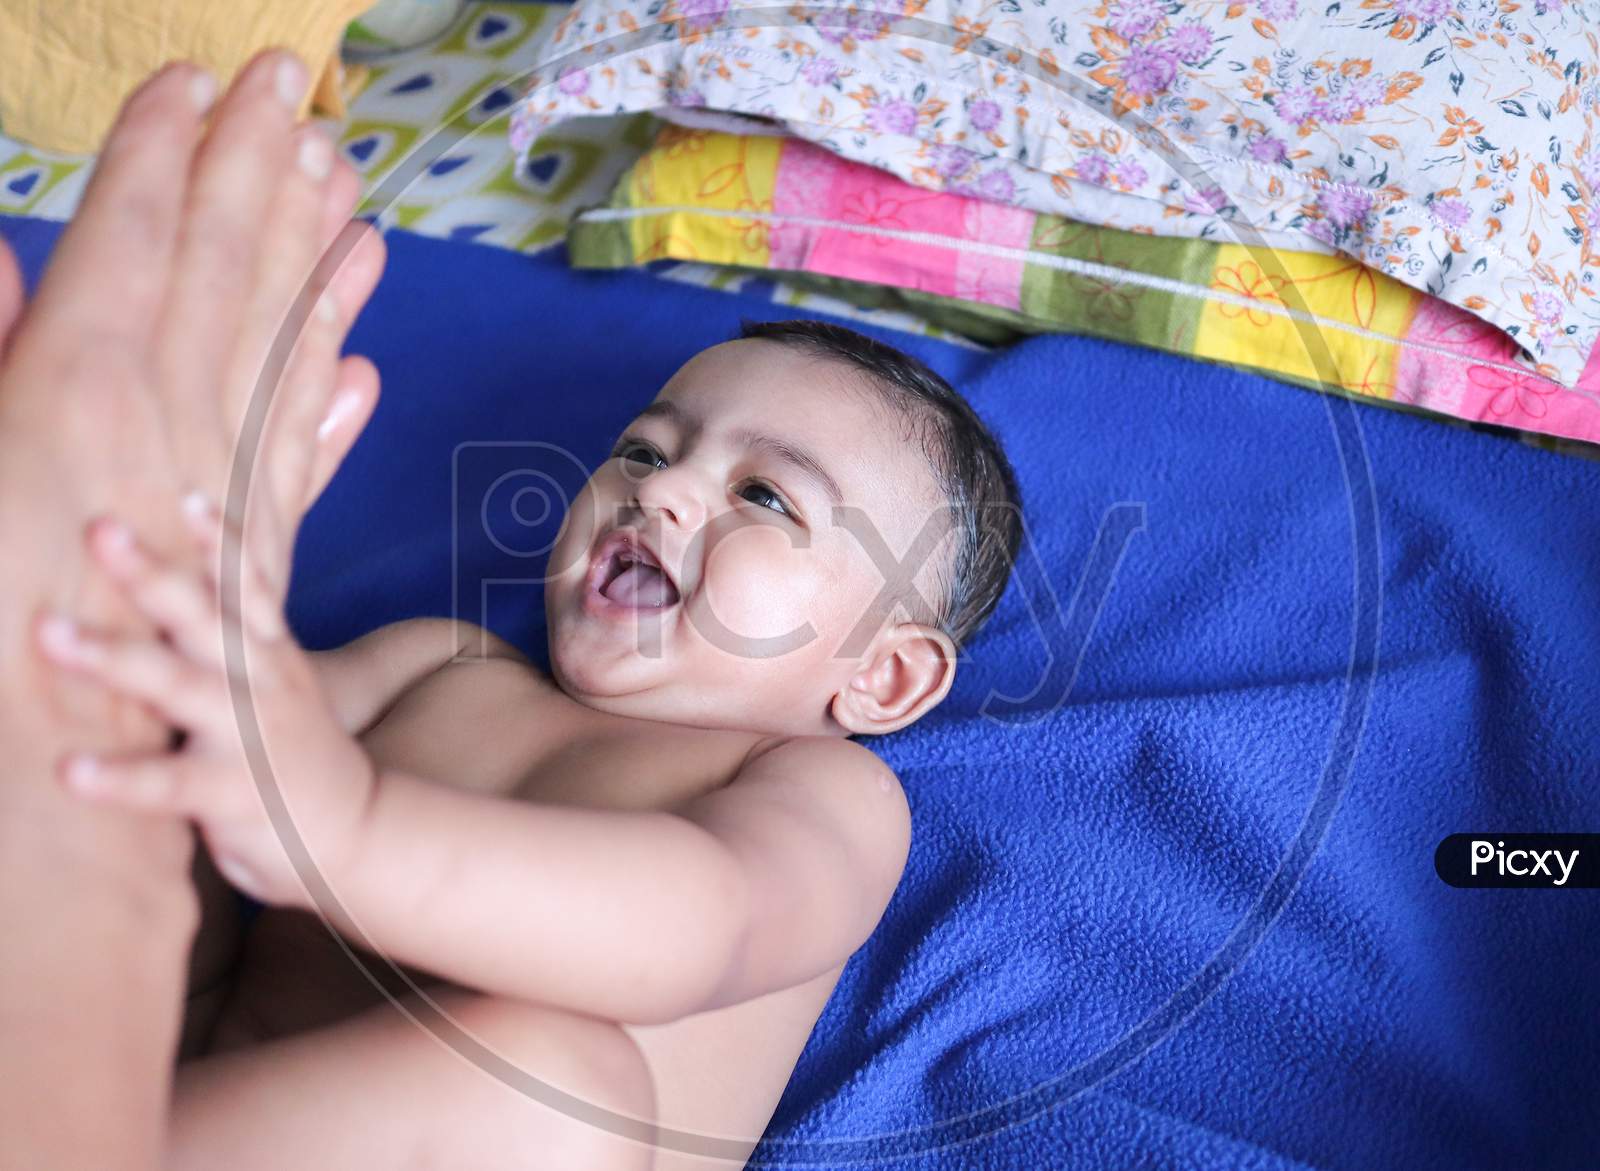 An Infant Toddler Baby Boy Smiling On A Blue Towel